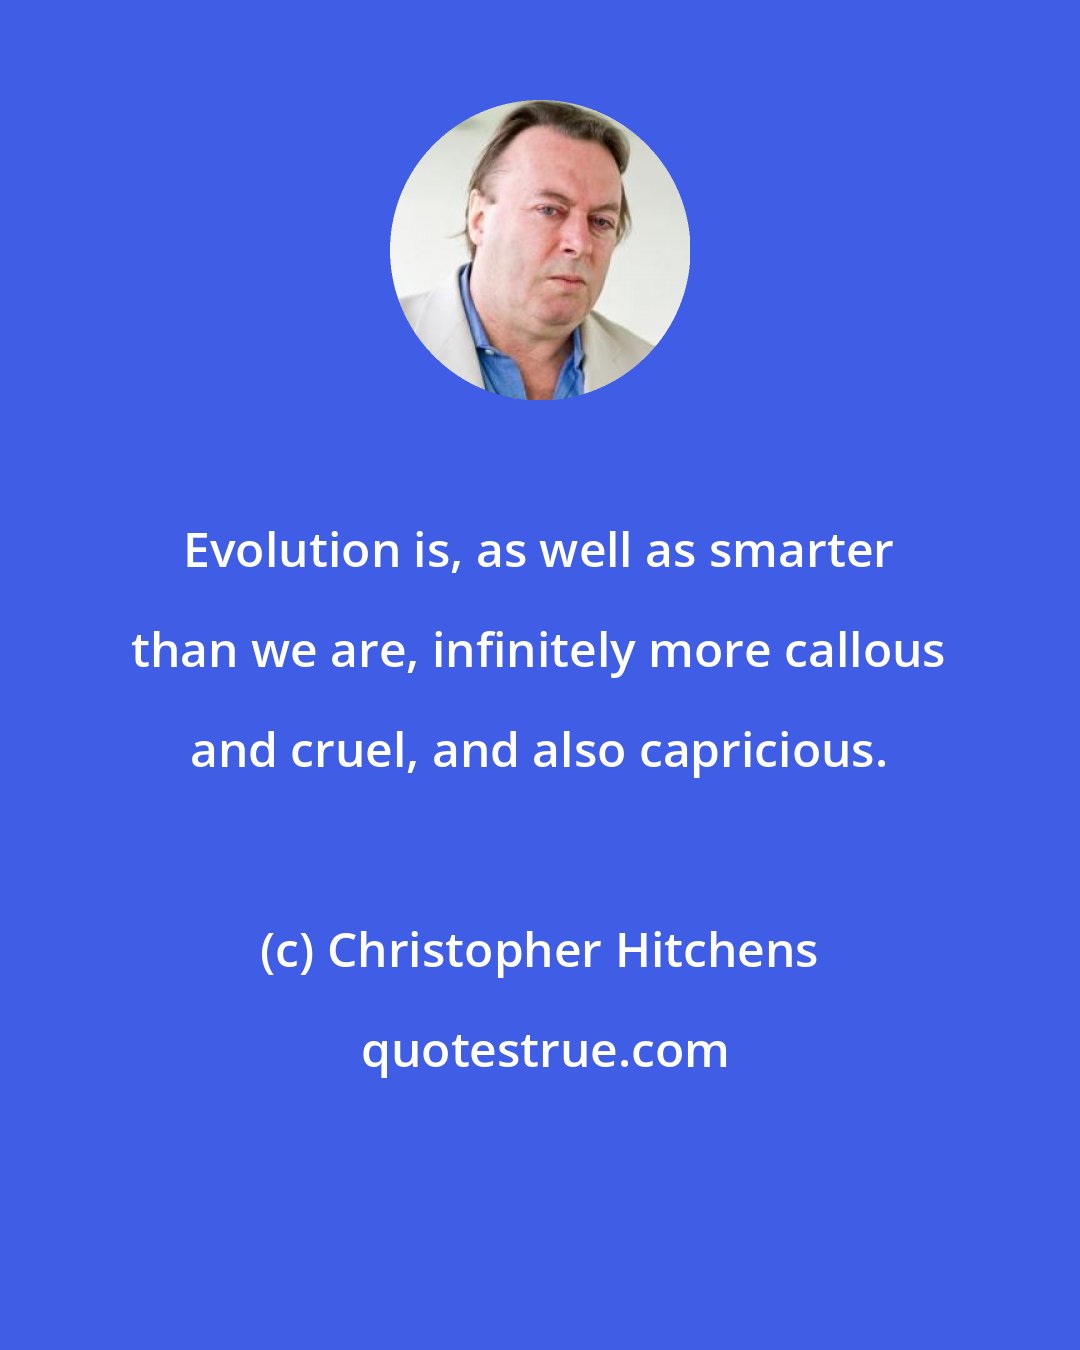 Christopher Hitchens: Evolution is, as well as smarter than we are, infinitely more callous and cruel, and also capricious.